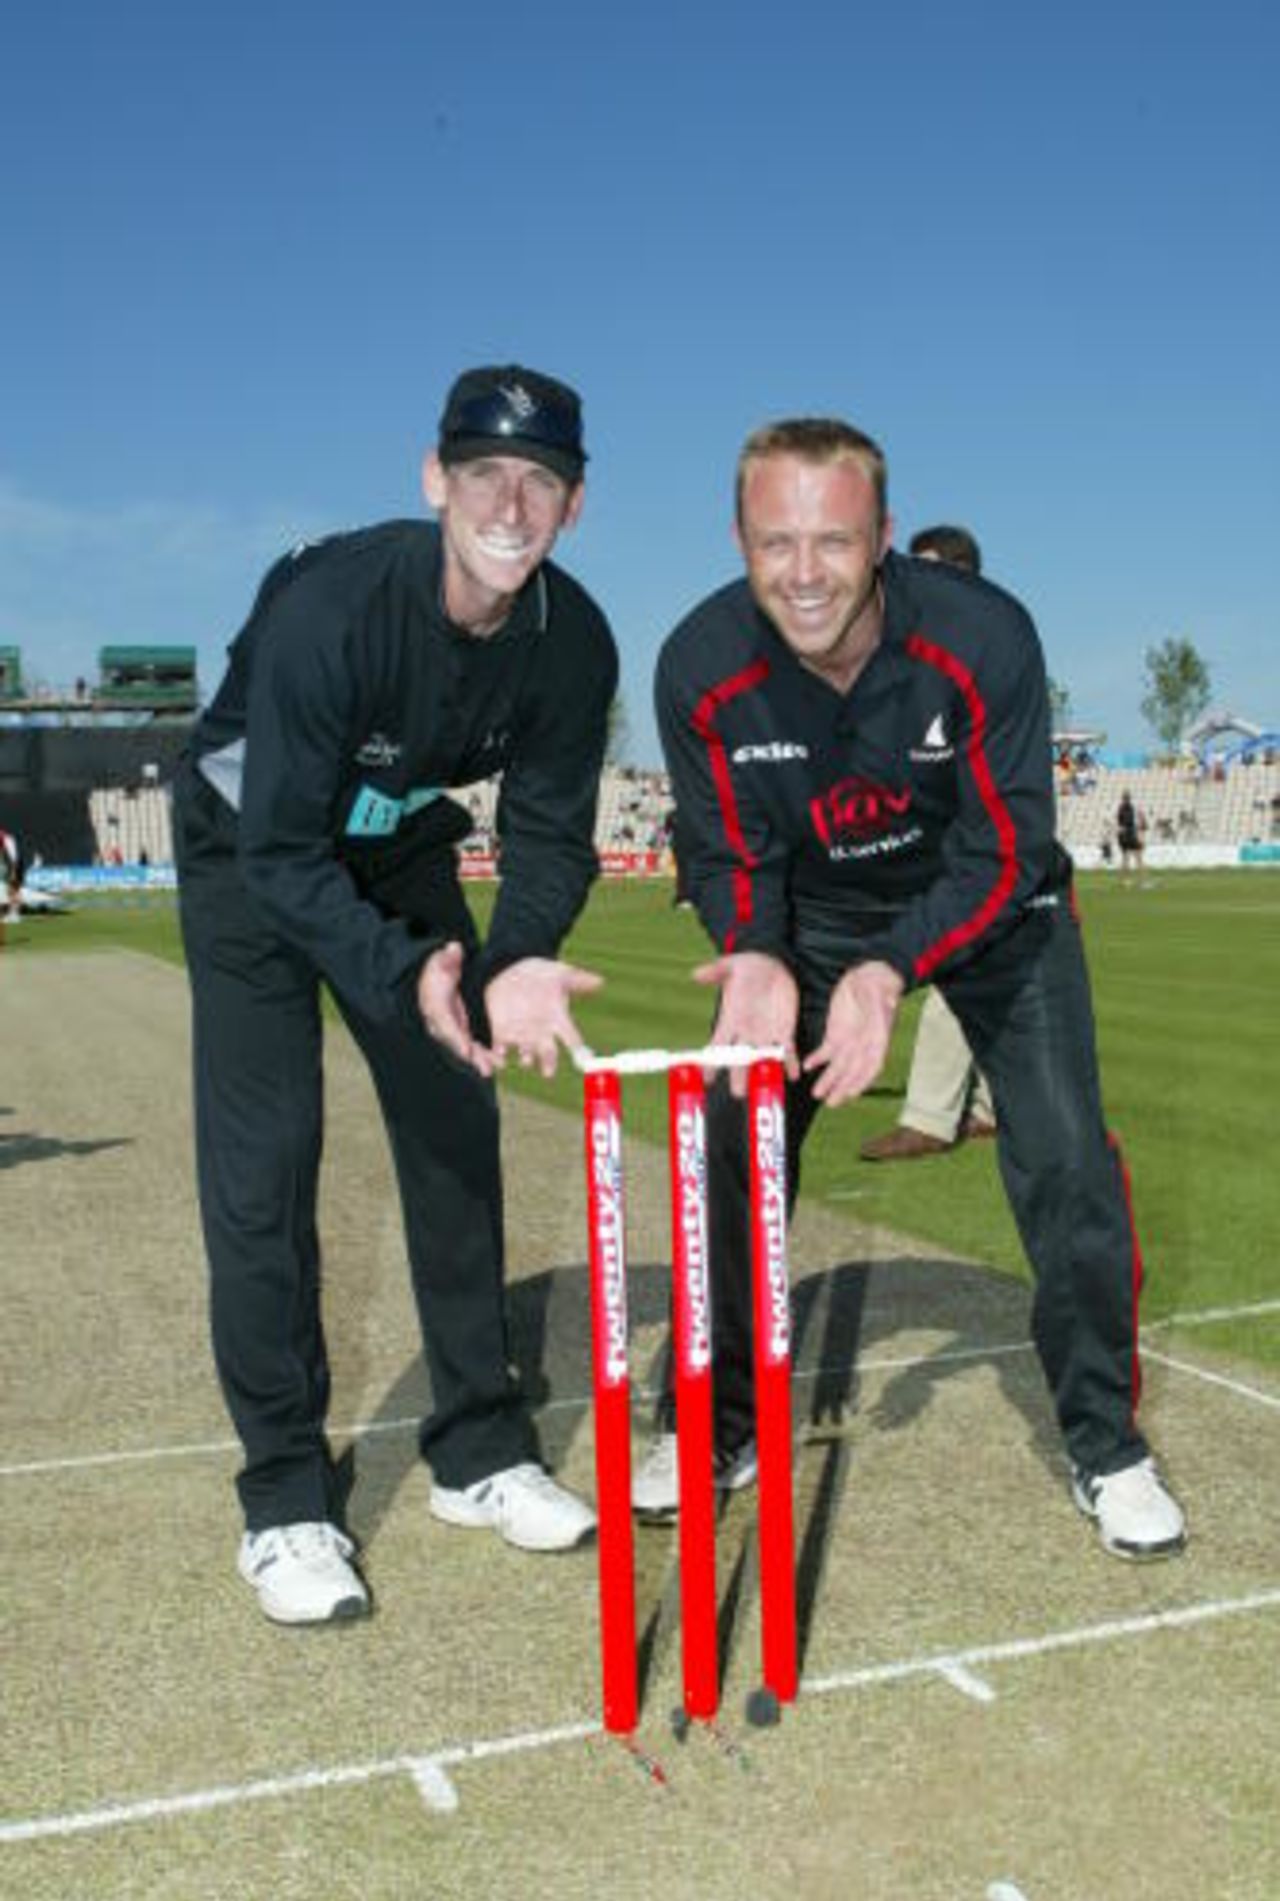 Captains pose with the special Twenty20 stumps